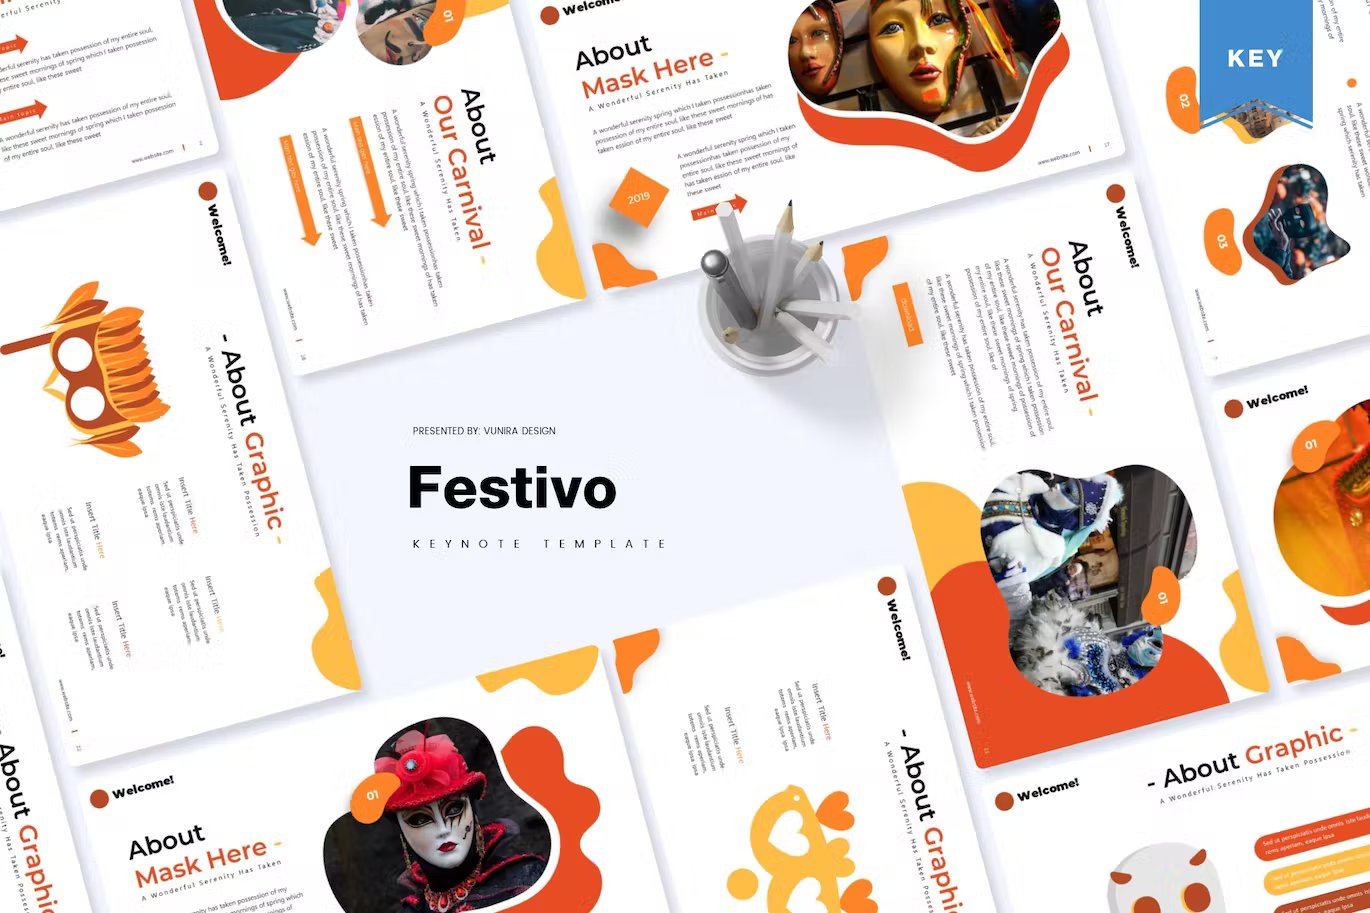 Black lettering "Festivo Keynote Template" and different presentation templates in white, black, orange, red and yellow on a white background.